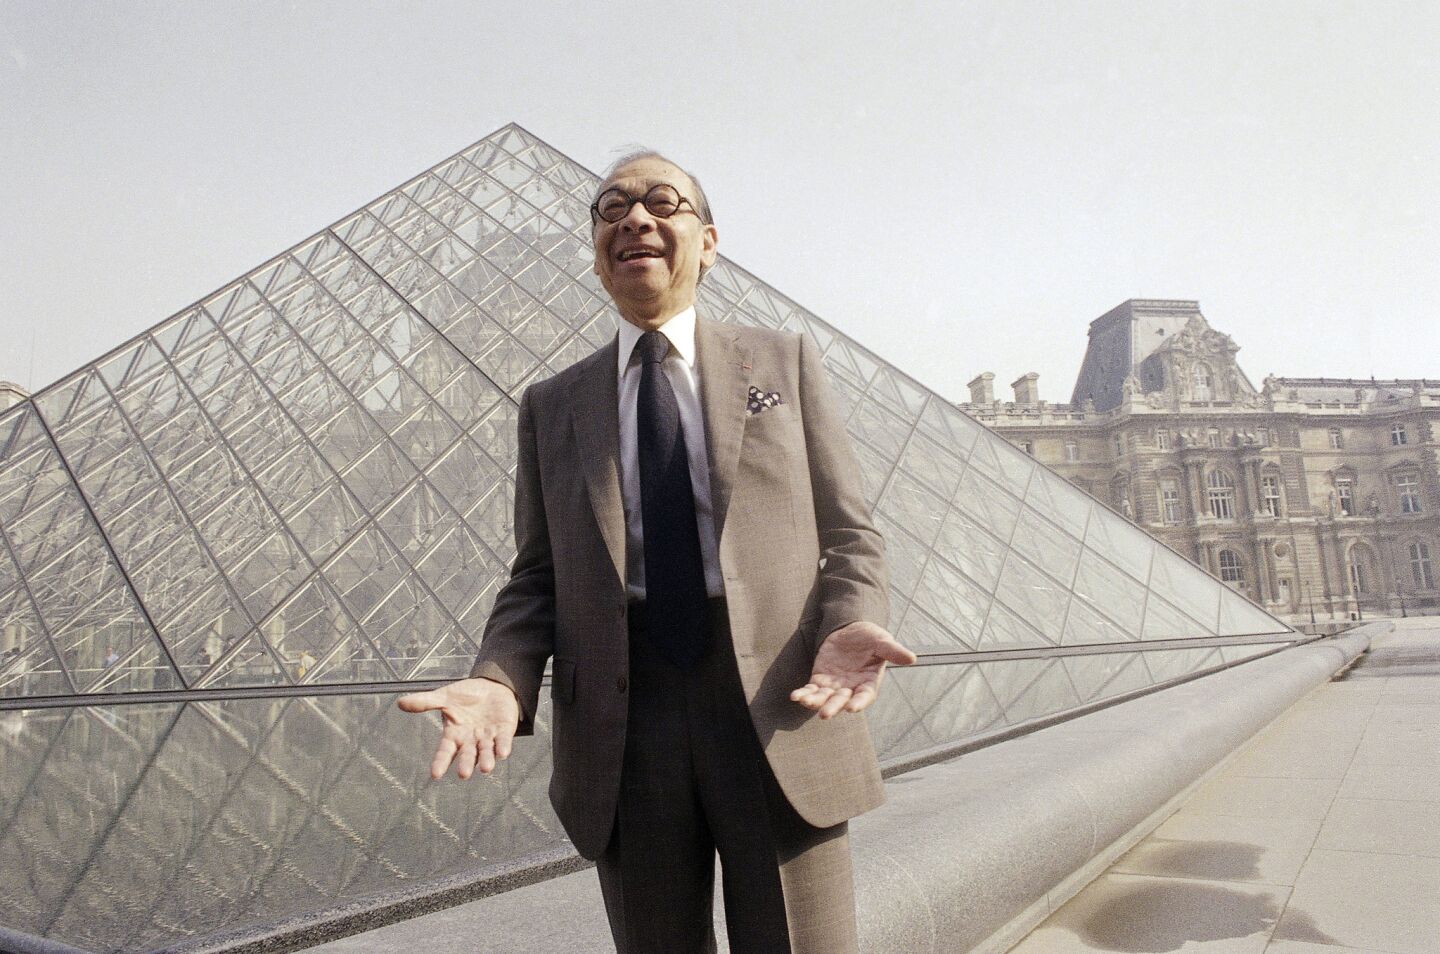 I.M. Pei in front of the Louvre glass pyramid, which he designed, in the museum's Napoleon Courtyard, before its inauguration in Paris.